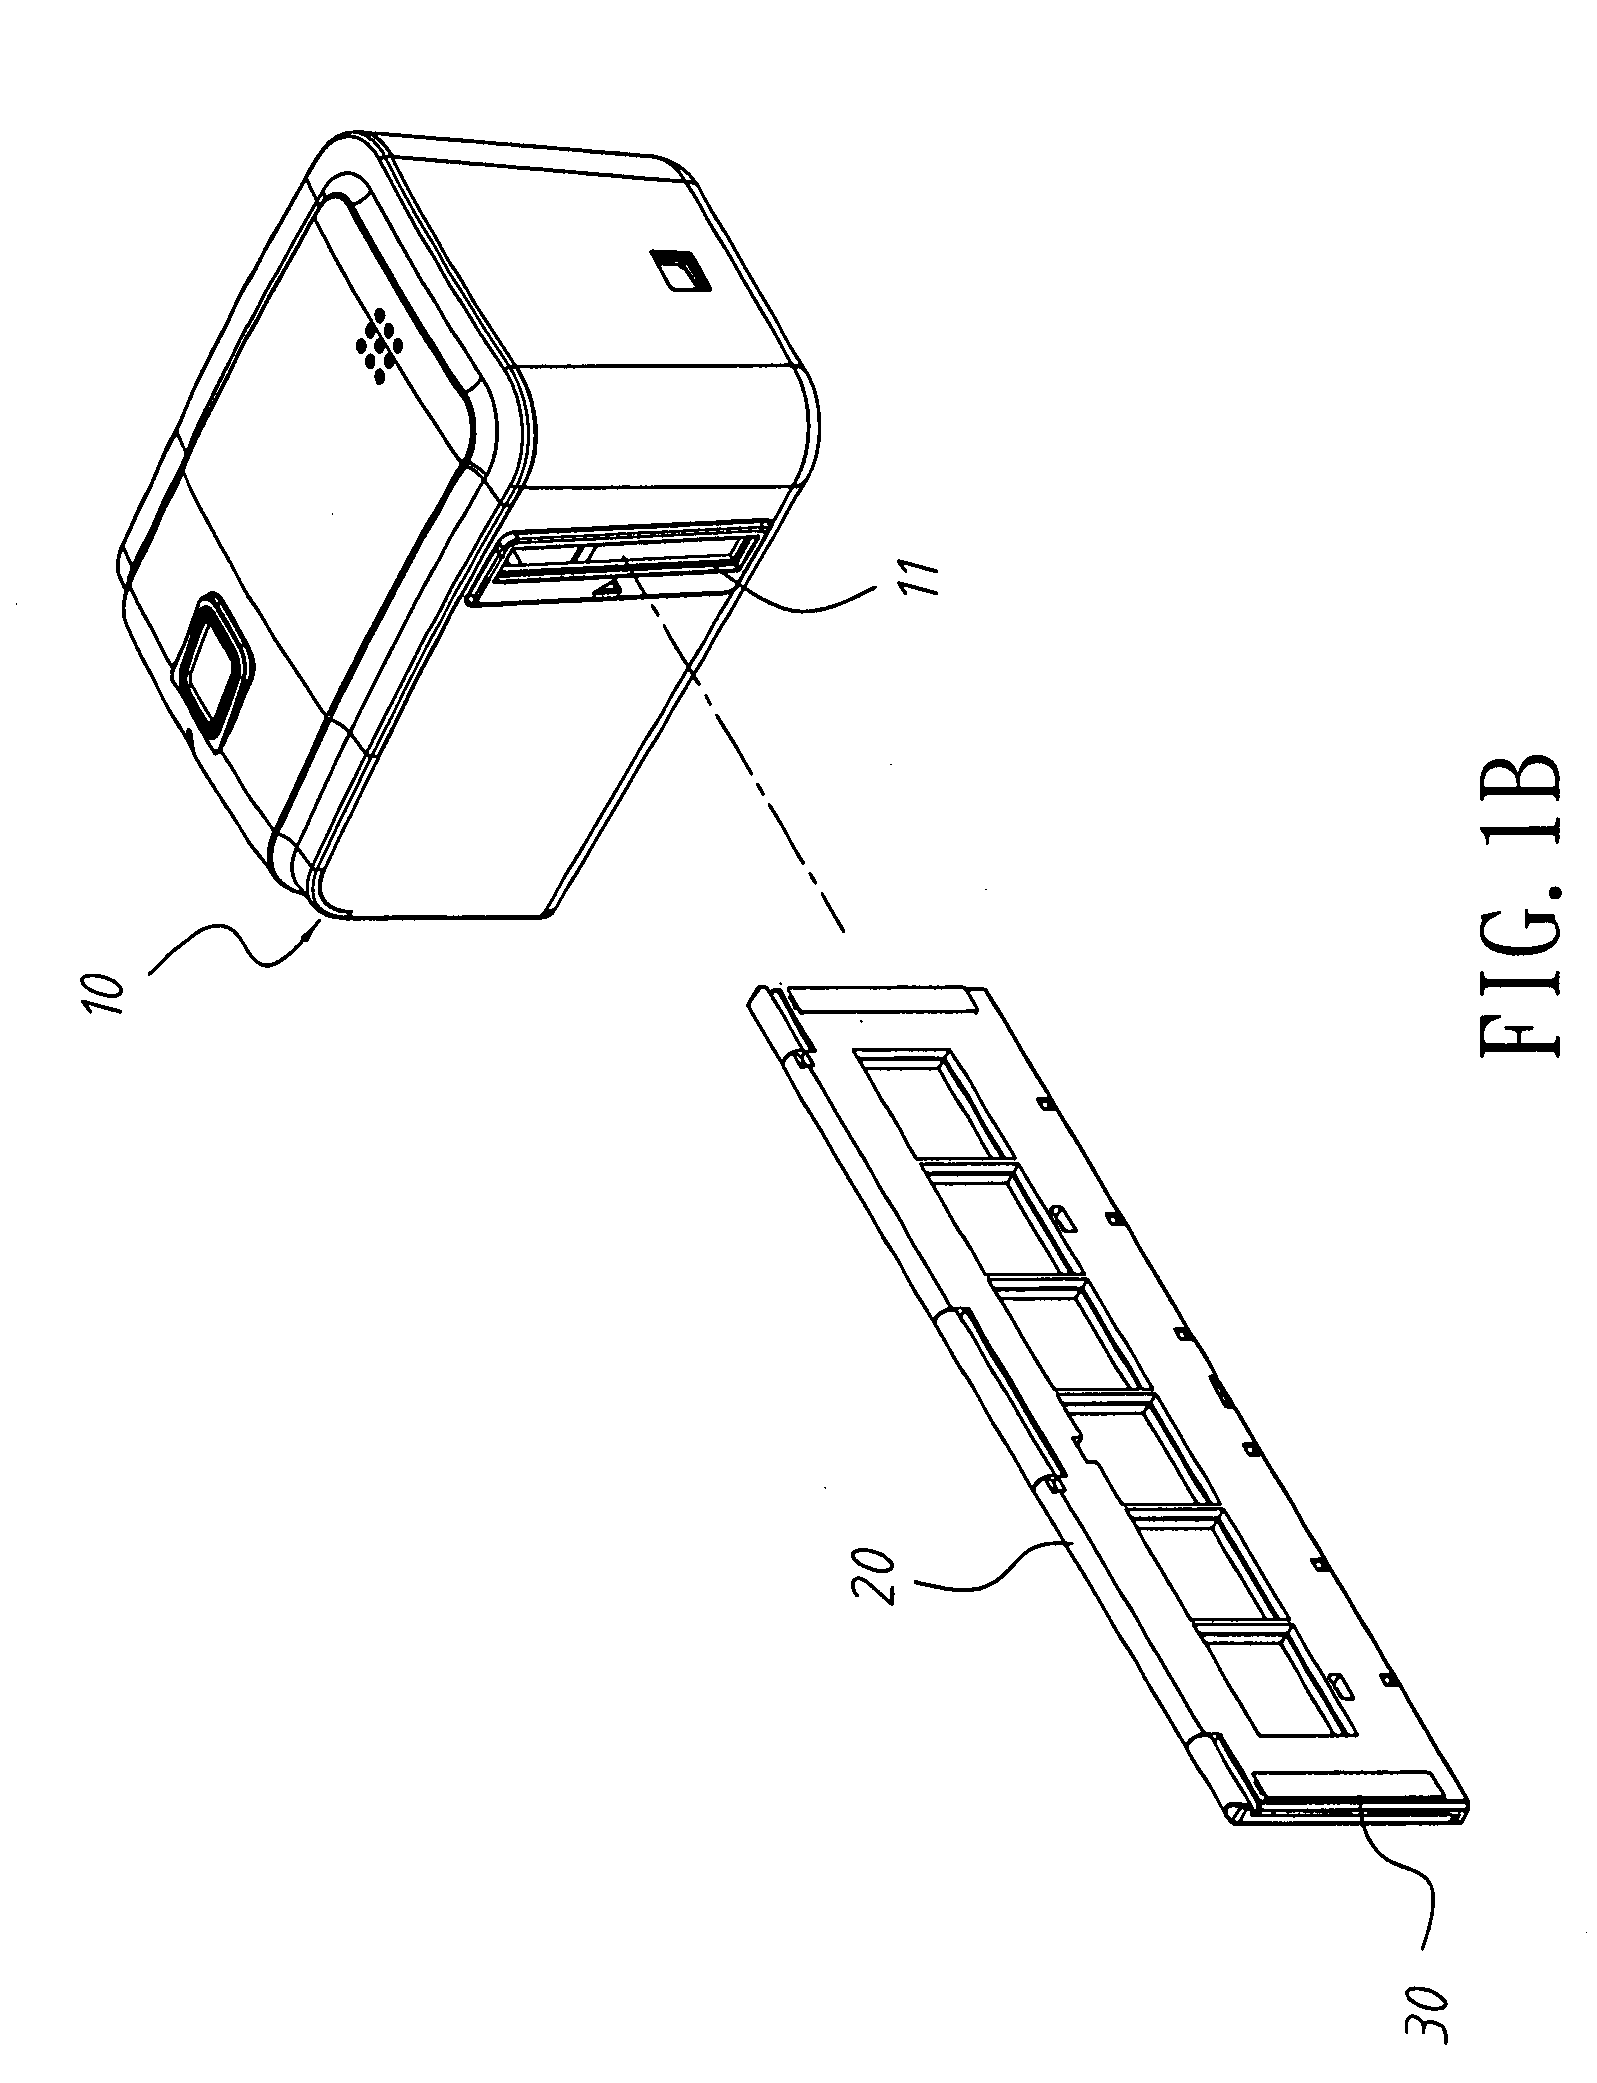 Automatic dust-removing filmscanner